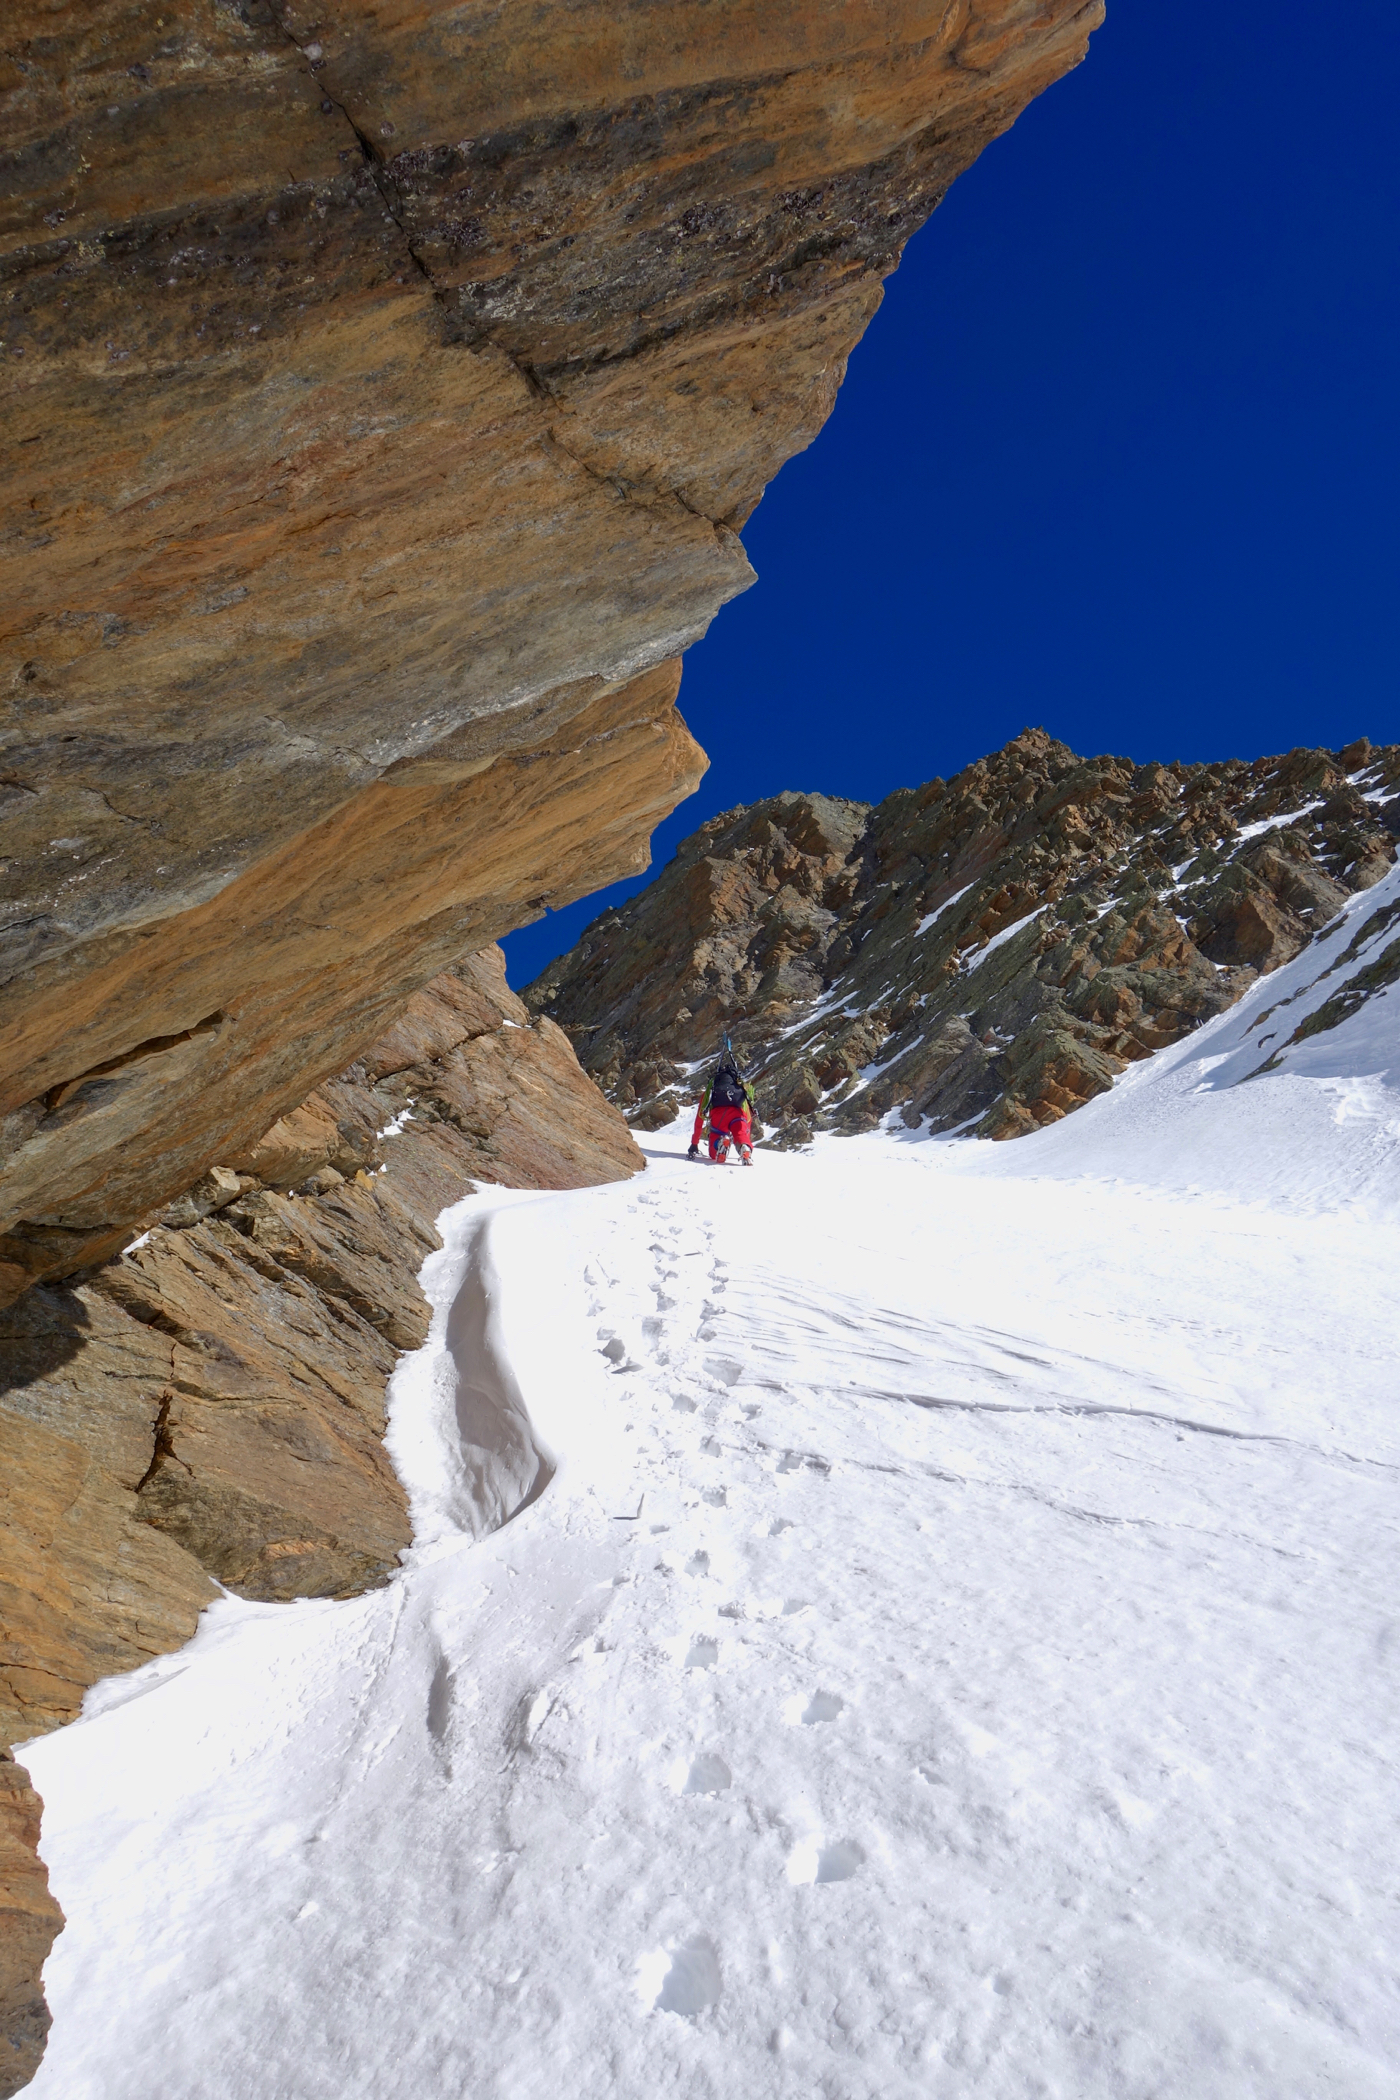 The start of the couloir